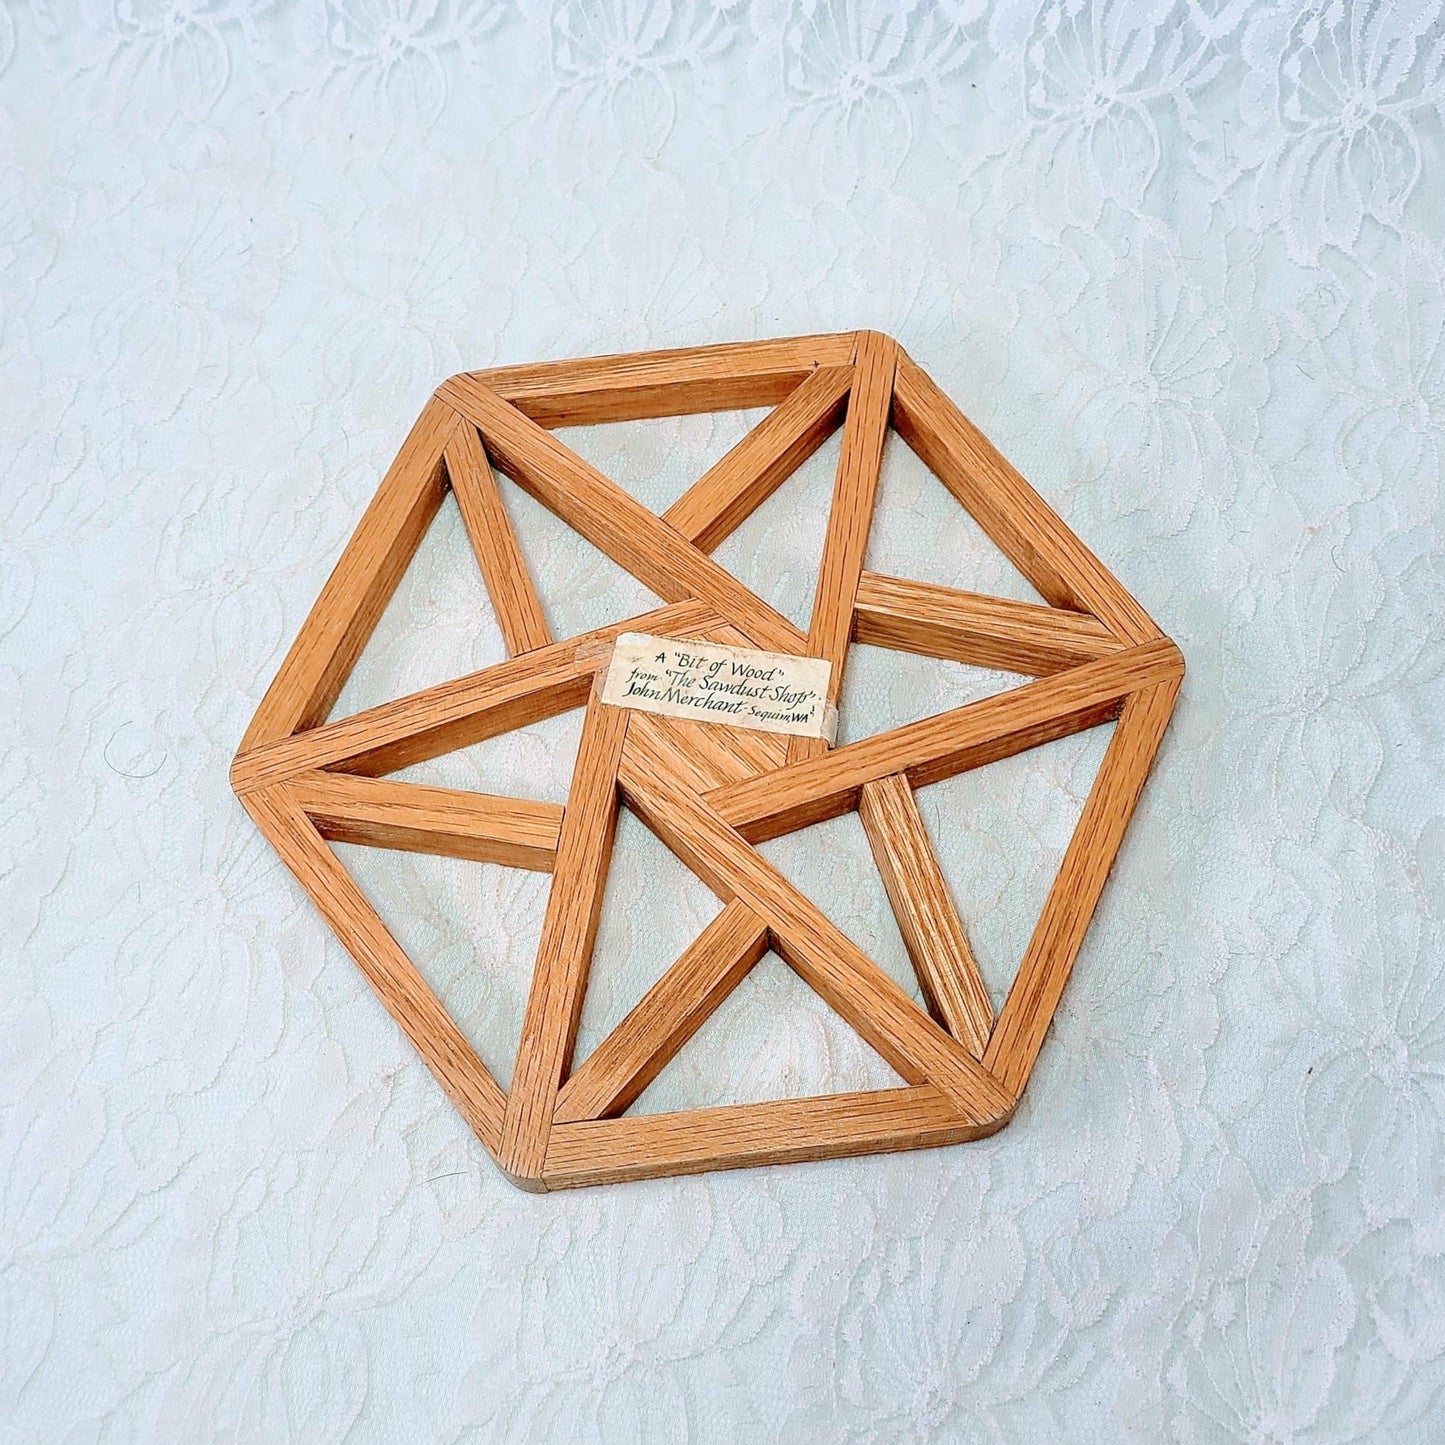 Wooden Trivet from "The Sawdust Shop" Sequim, Washington ~ Hot Pot Table Trivet or Large Coaster ~ Hand Made Wood 6 Sided Hexagon